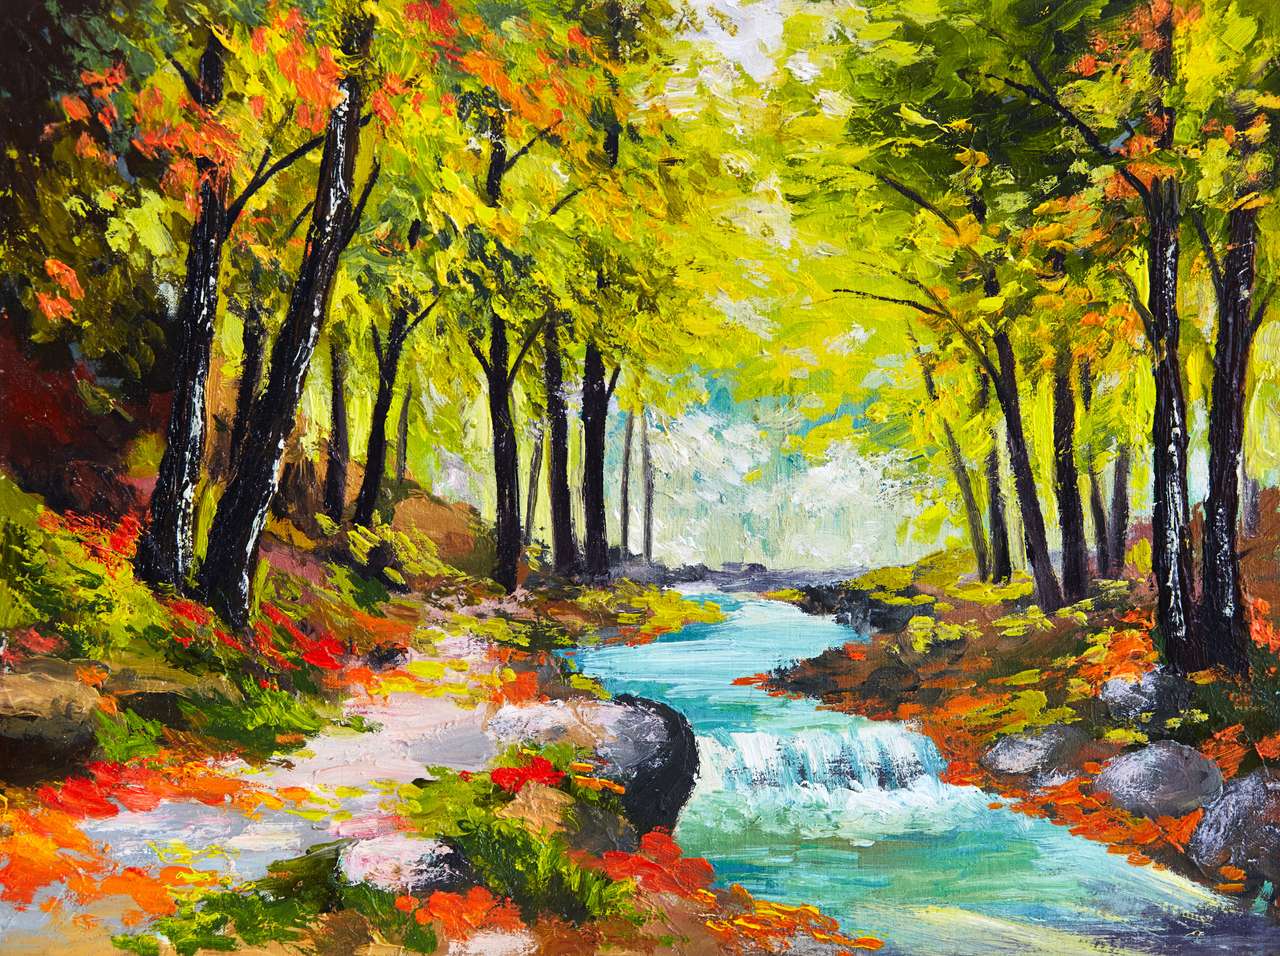 River in autumn forest puzzle online from photo